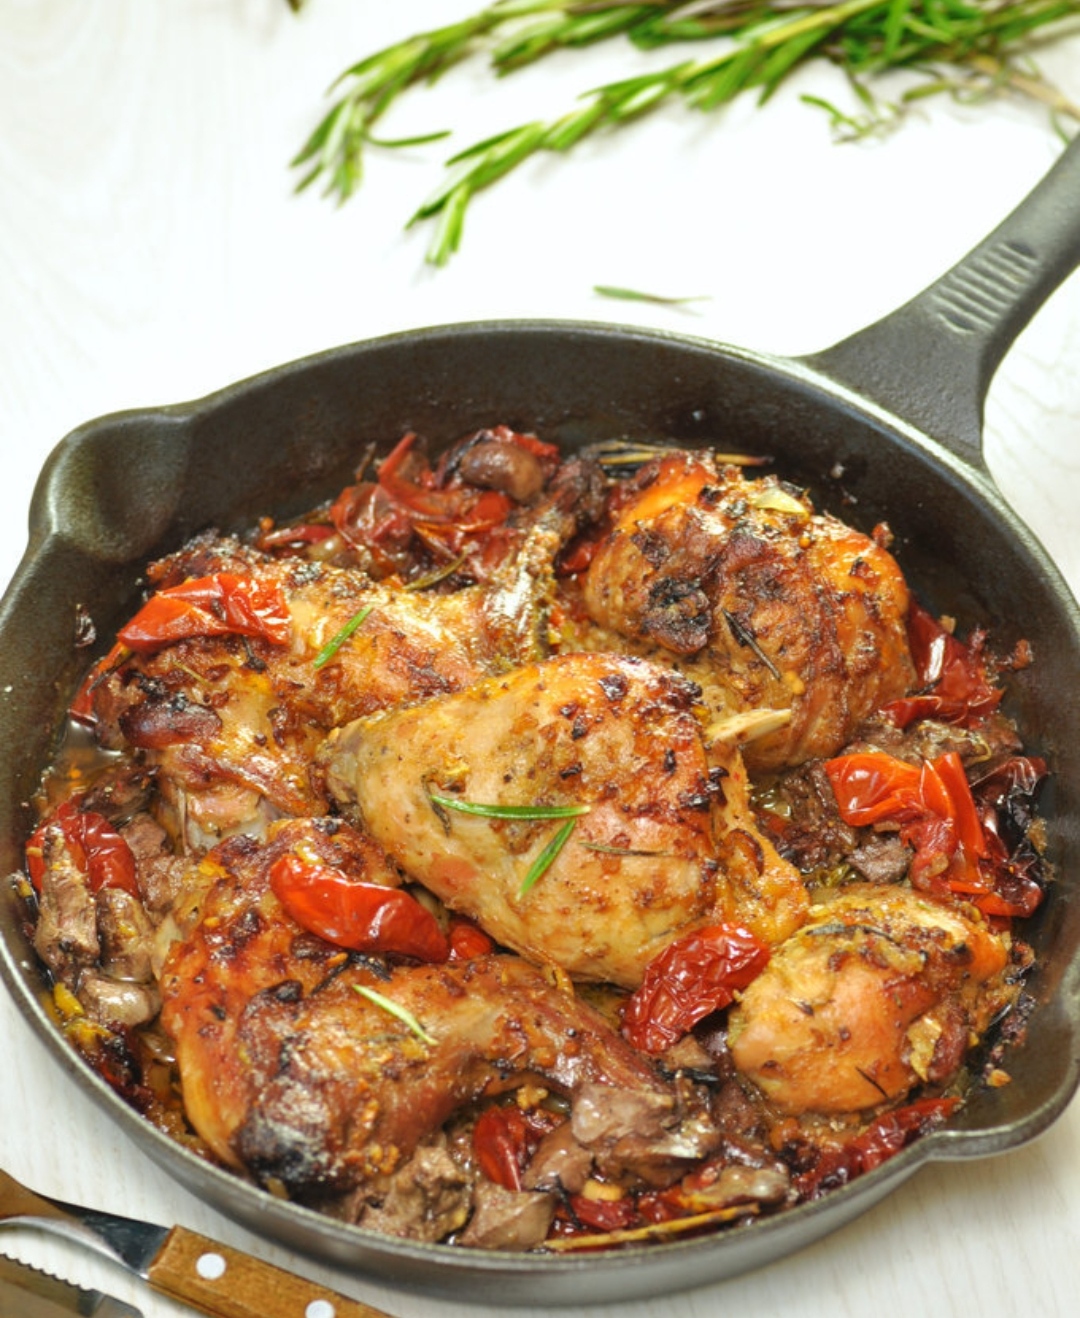 Rabbit baked with mustard and sun-dried tomatoes